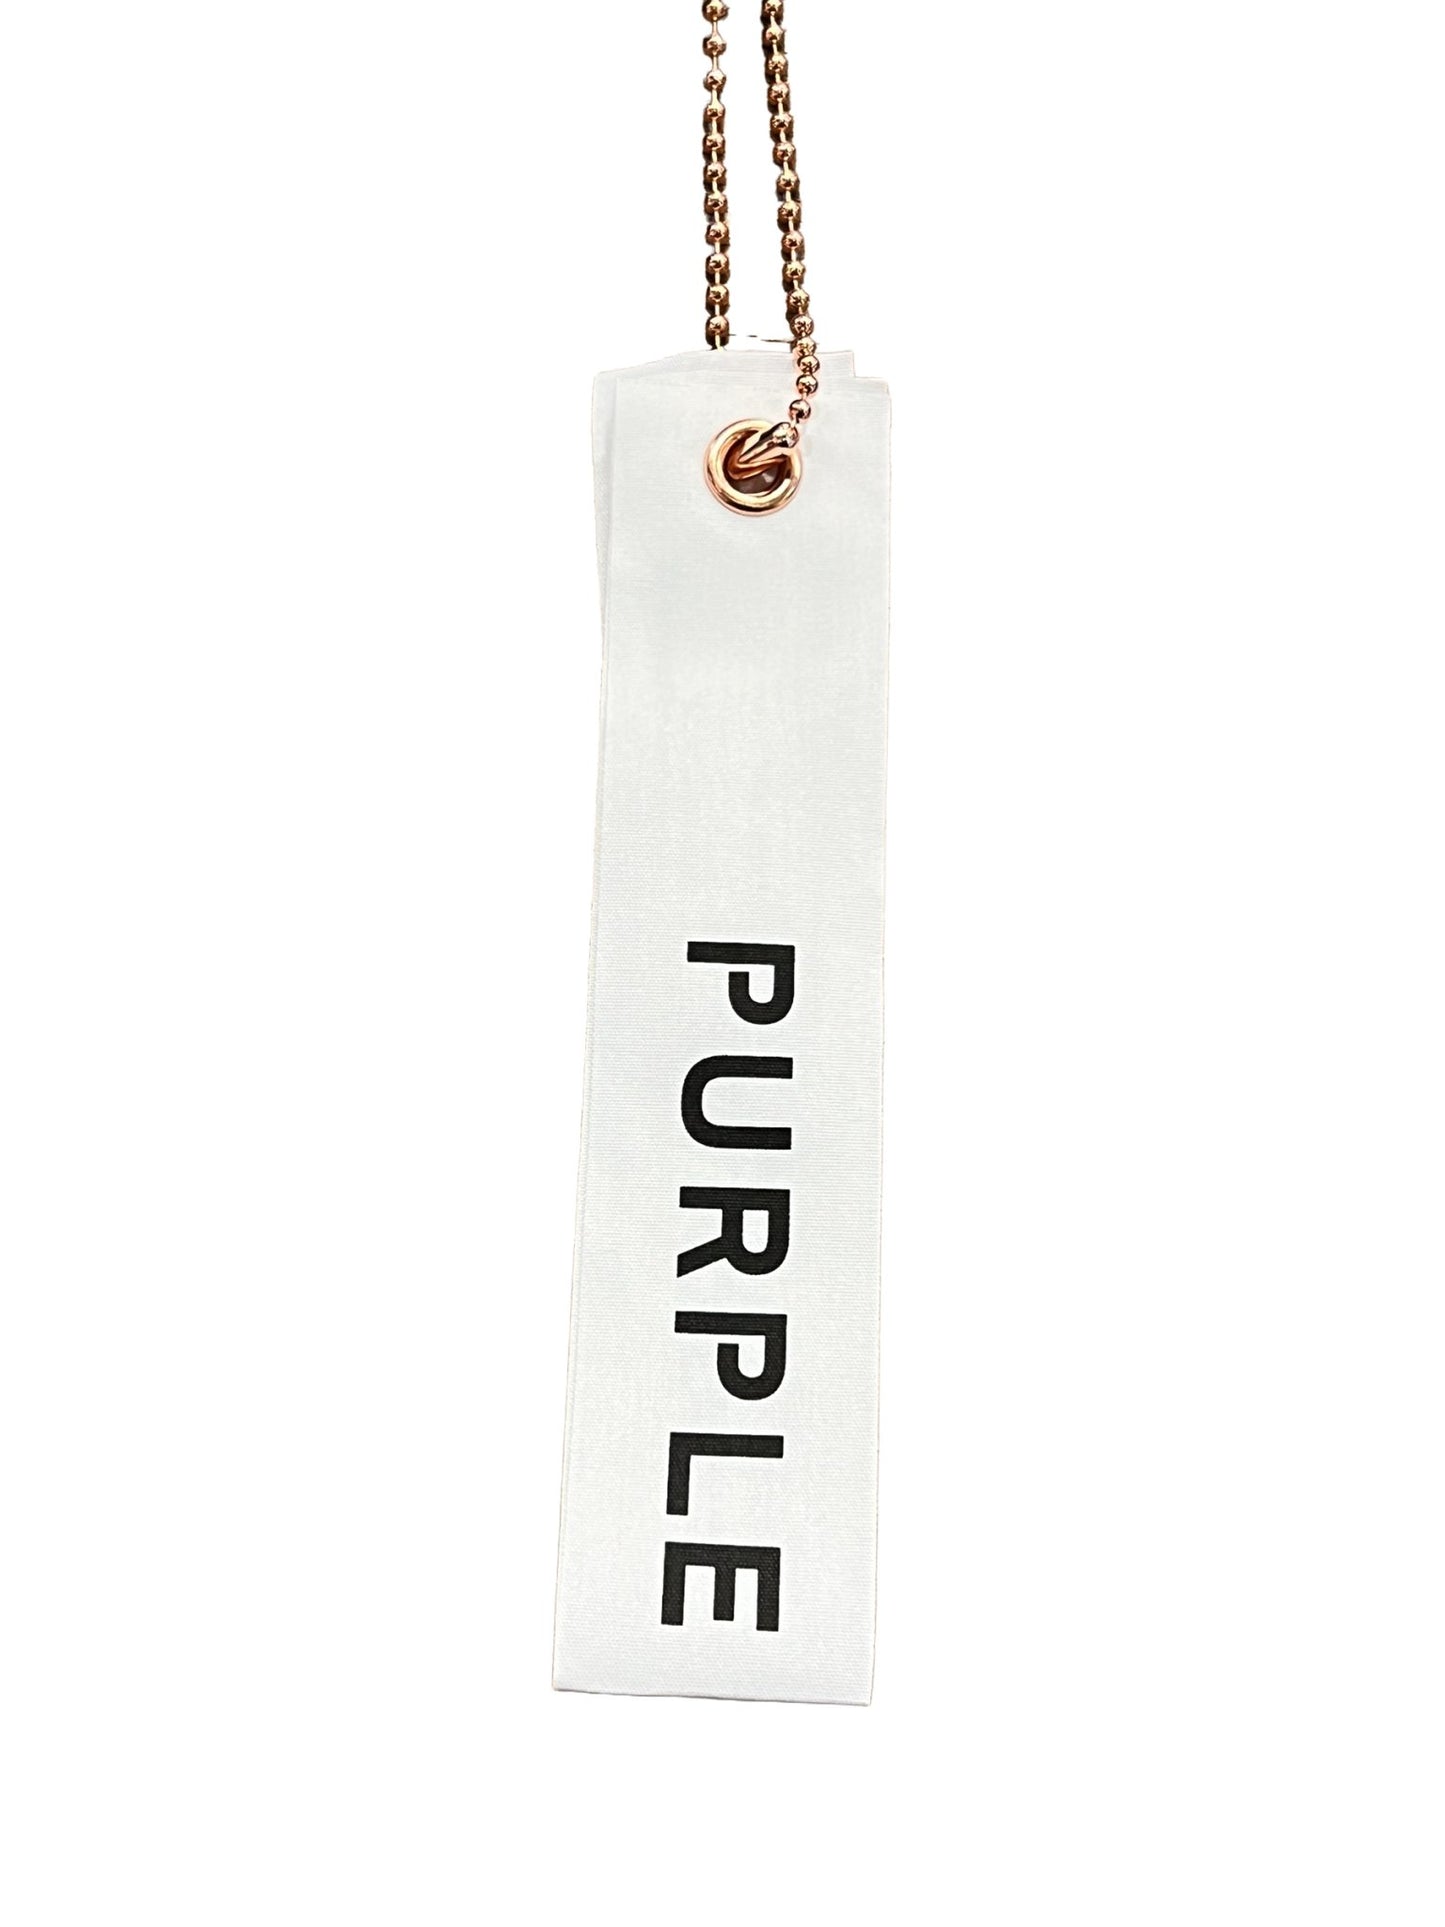 A white fabric tag suspended by a copper chain, with the product name "PURPLE BRAND P446-FCBB FRENCH TERRY SWEATSHORT BLK" printed in black letters.